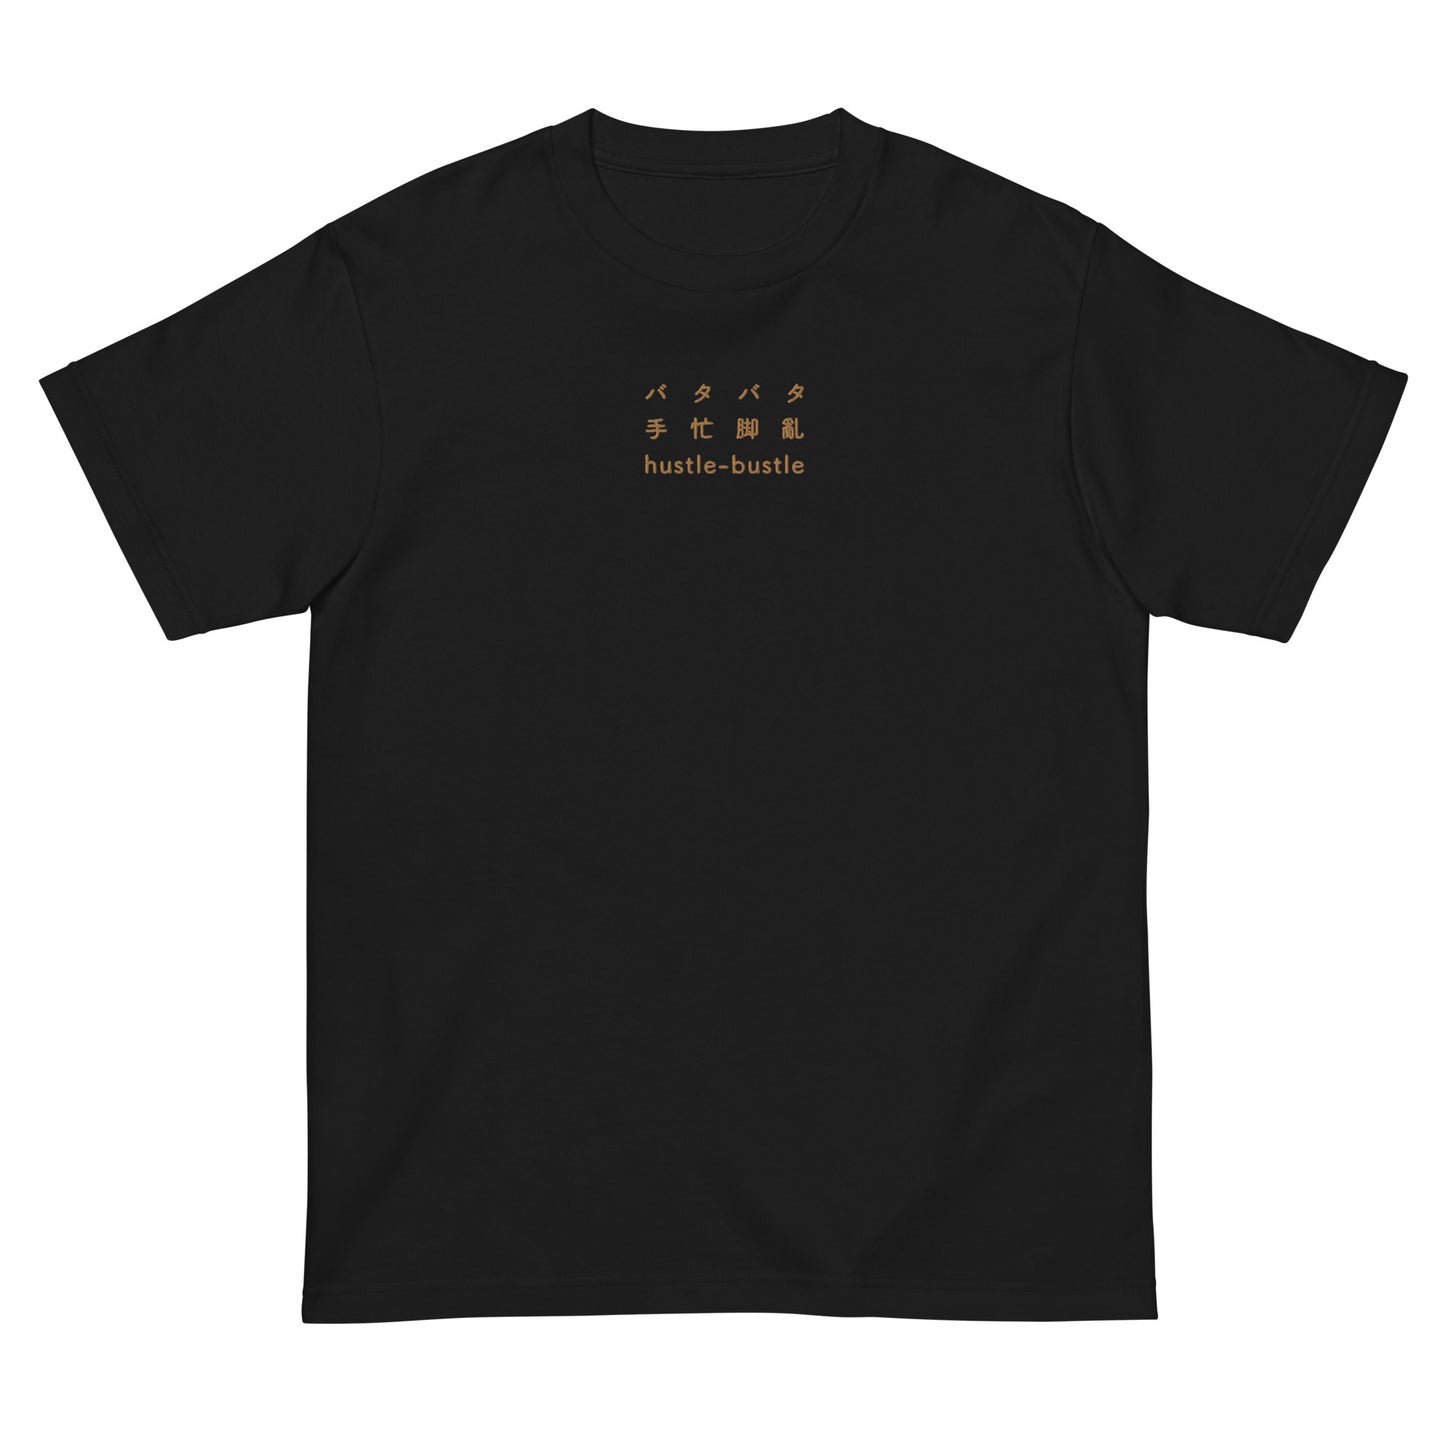 Black High Quality Tee - Front Design with an Brown Embroidery "Hustle-Bustle" in Japanese, Chinese and English